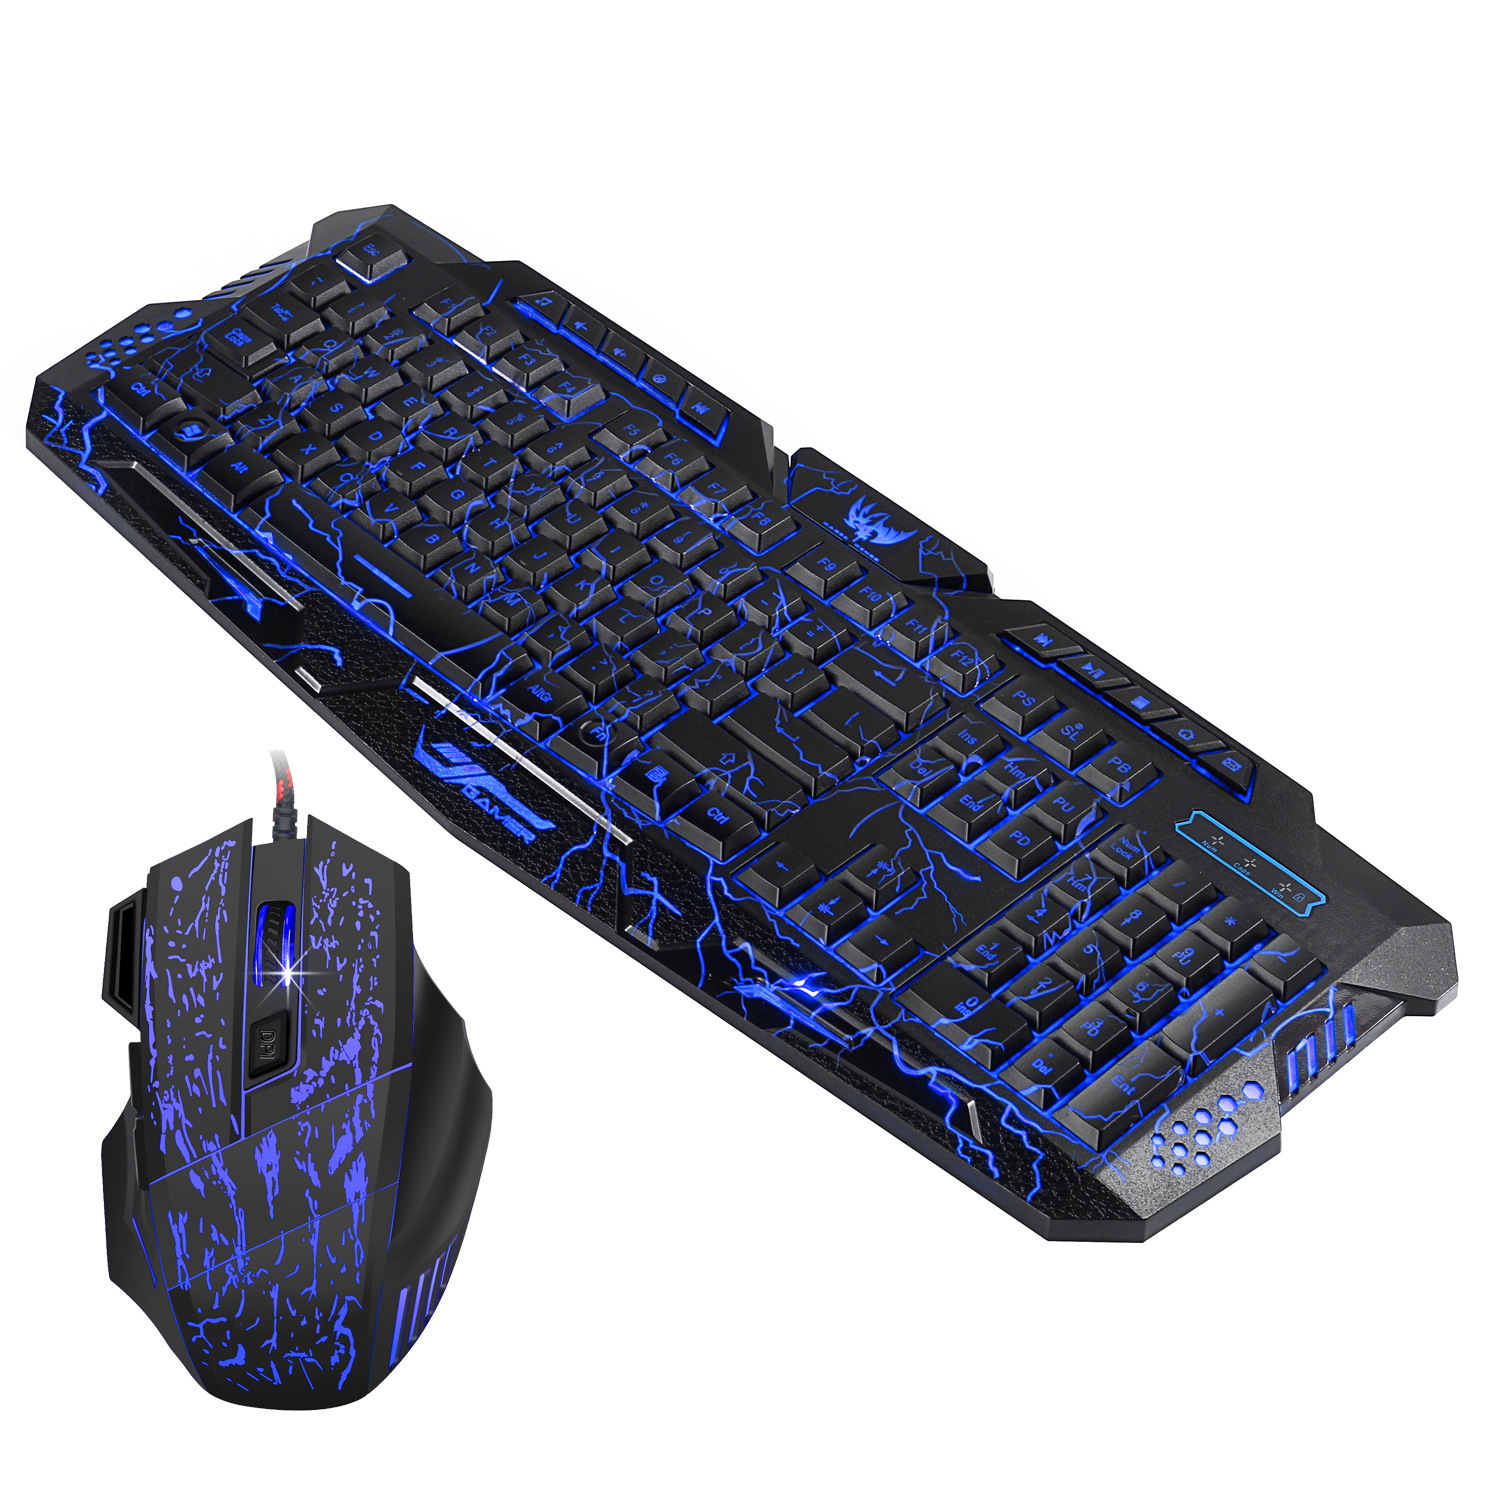 The New J60 English Cracked Mouse And Keyboard Set Colorful Backlit Gaming Mouse Three-color Backlit Keyboard Spot